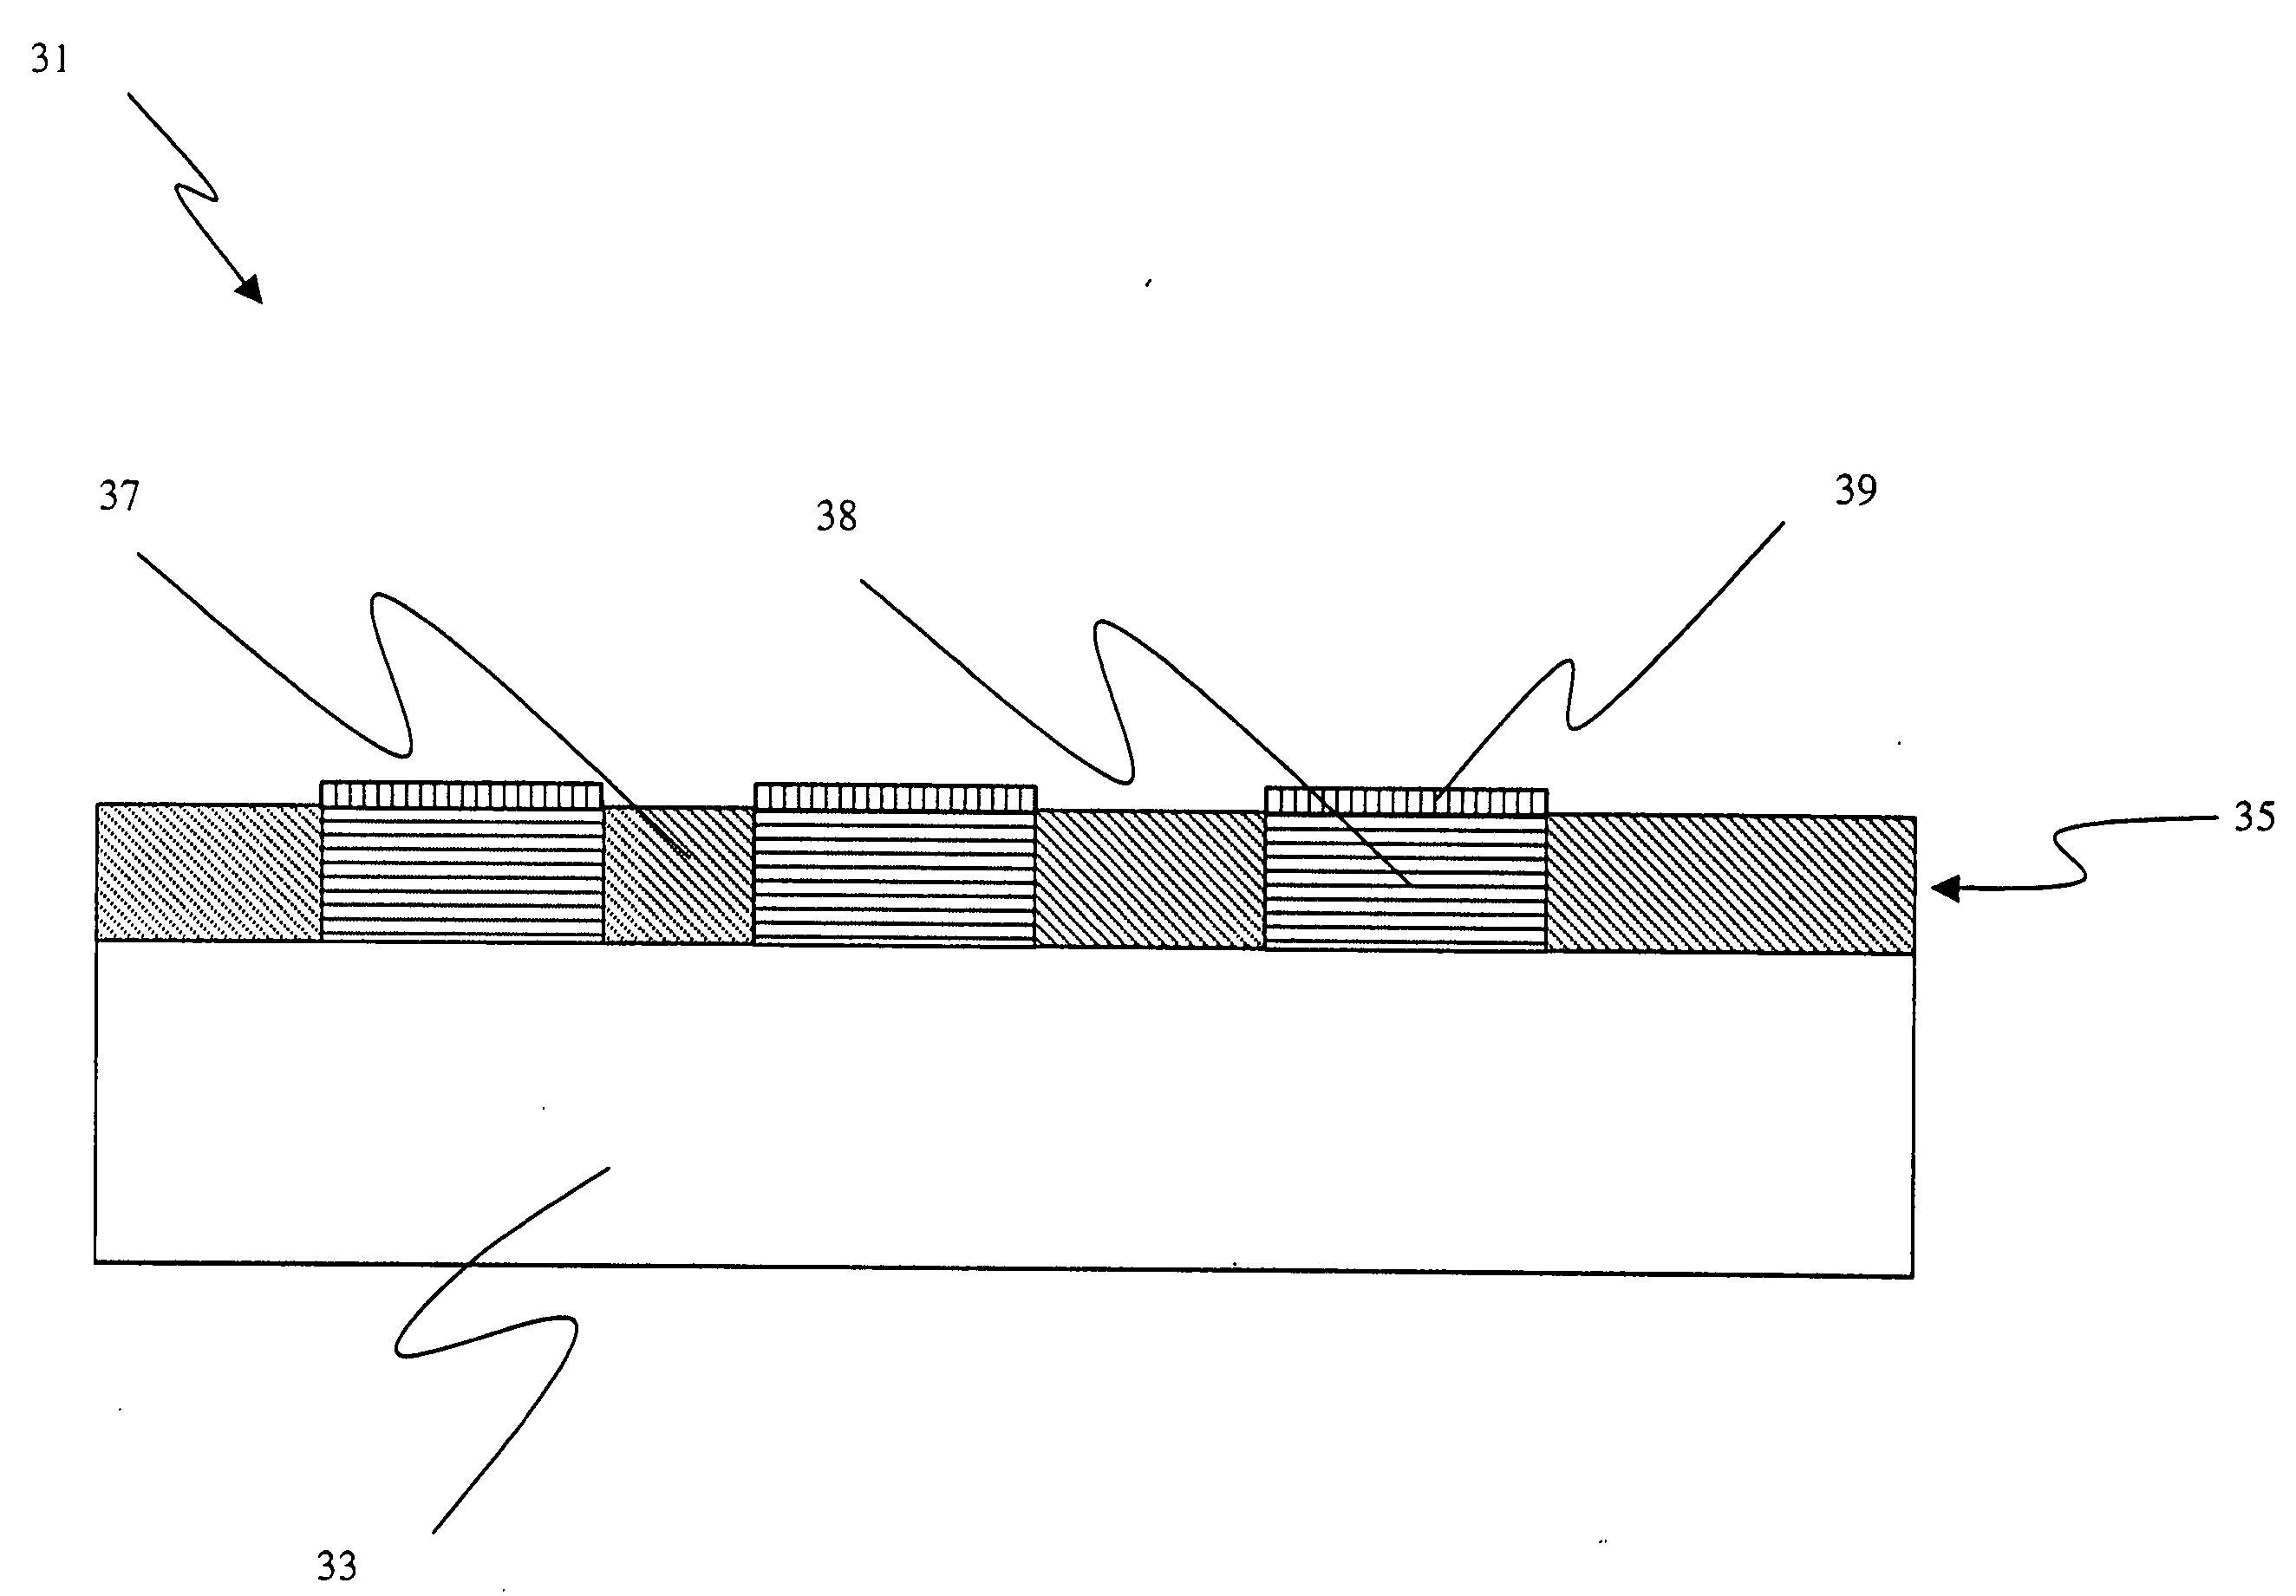 Metal and metal oxide patterned device